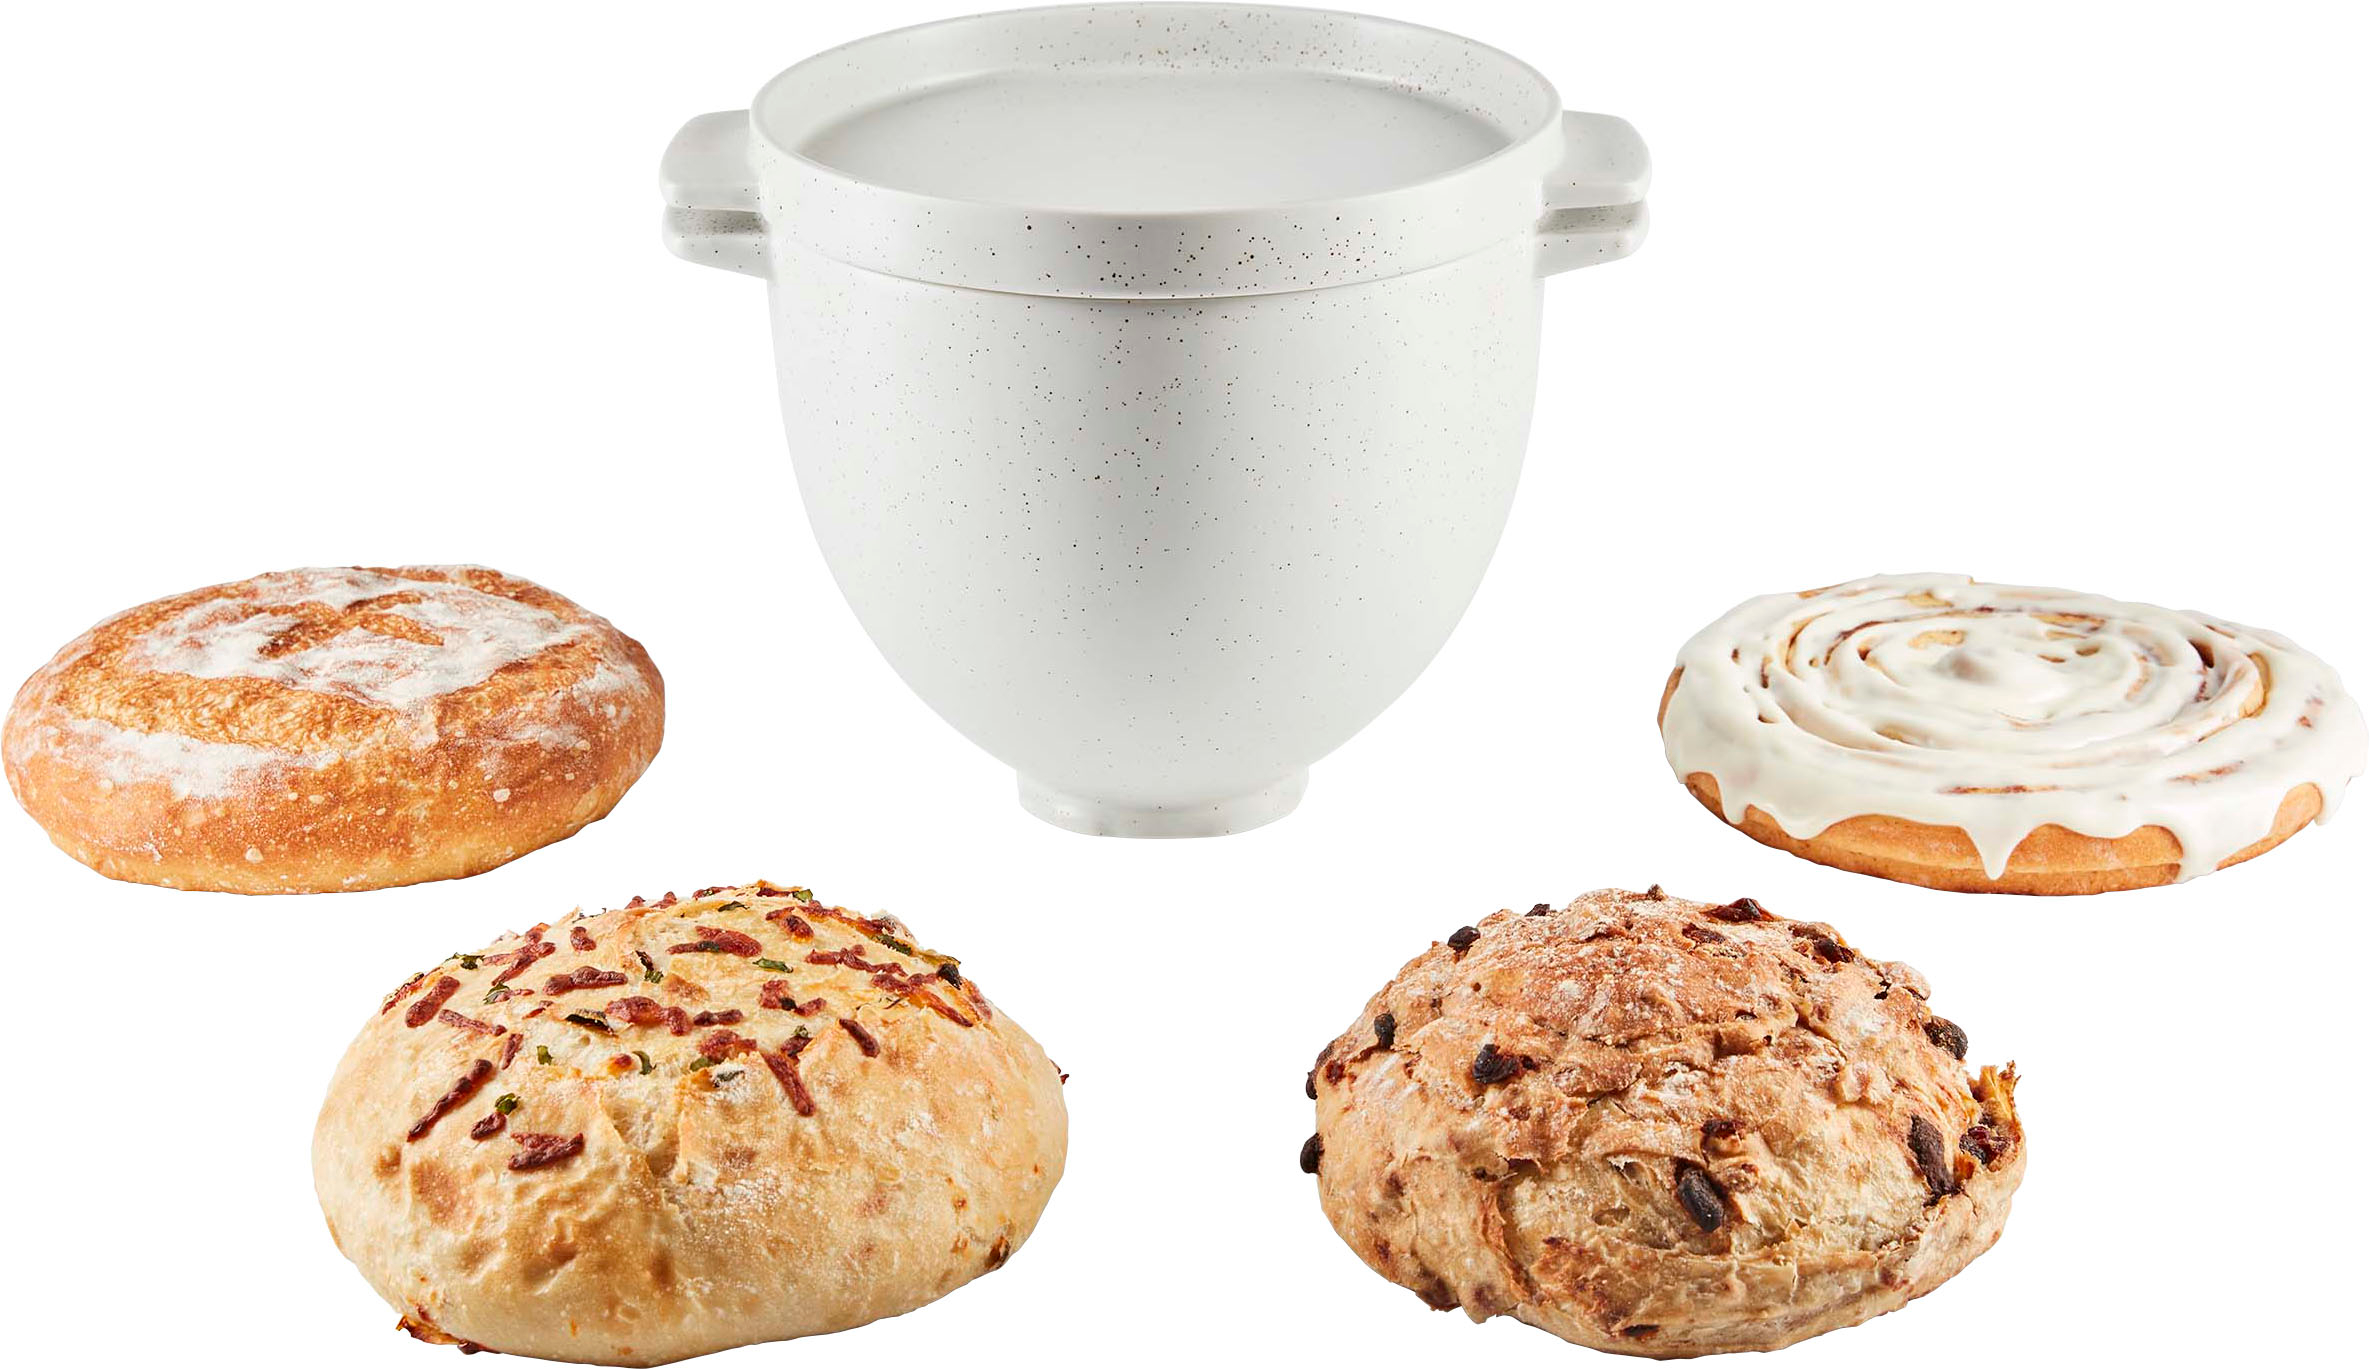 Oven, Microwave safe,Glass Bread Bowl with Baking Lid for